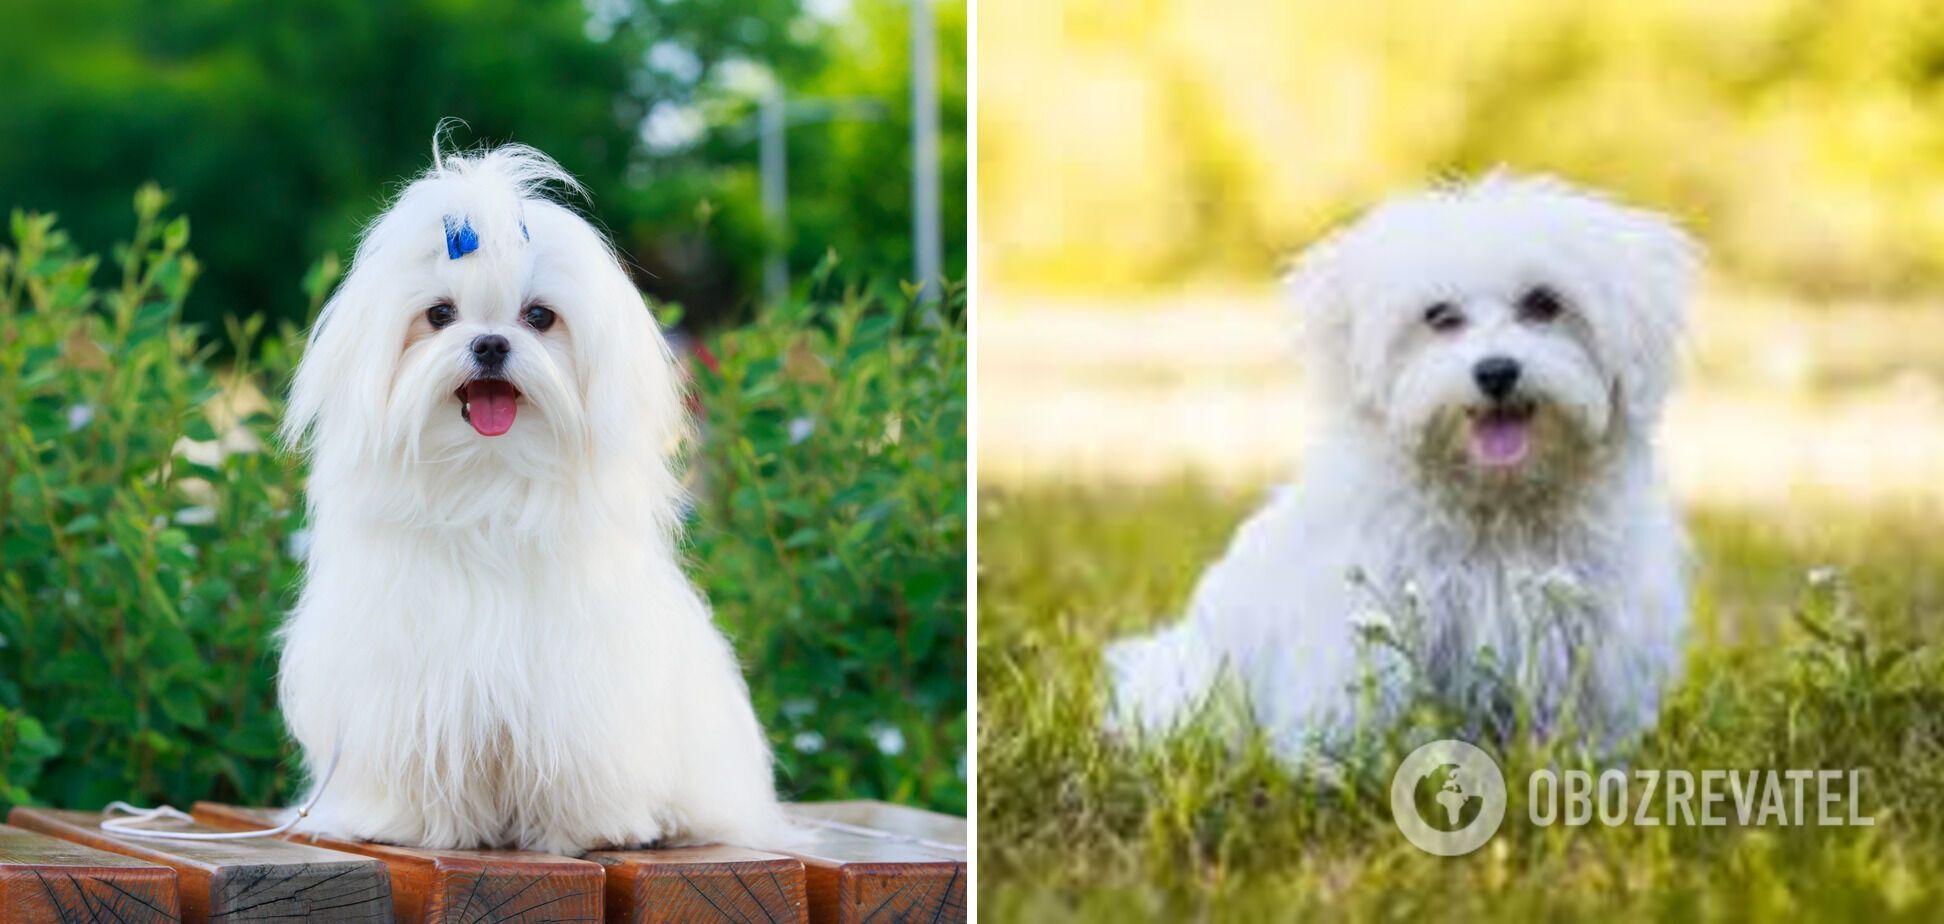 As if they came off the TV screens: what breeds of dogs are the most beautiful. Photo